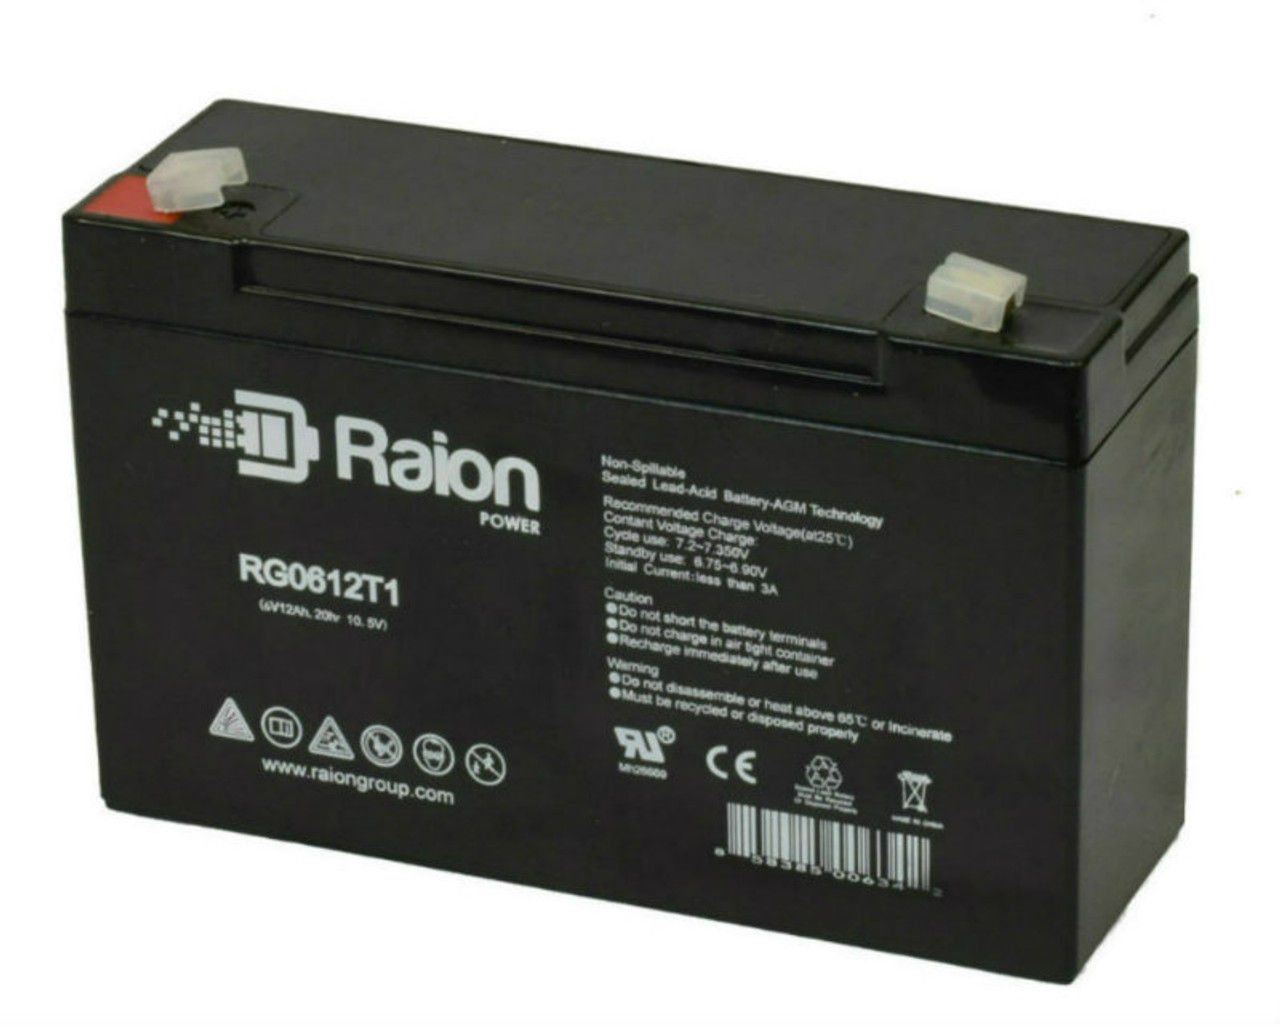 Raion Power RG06120T1 Replacement 6V 12Ah Emergency Light Battery for Sure-Lites SL2650SP